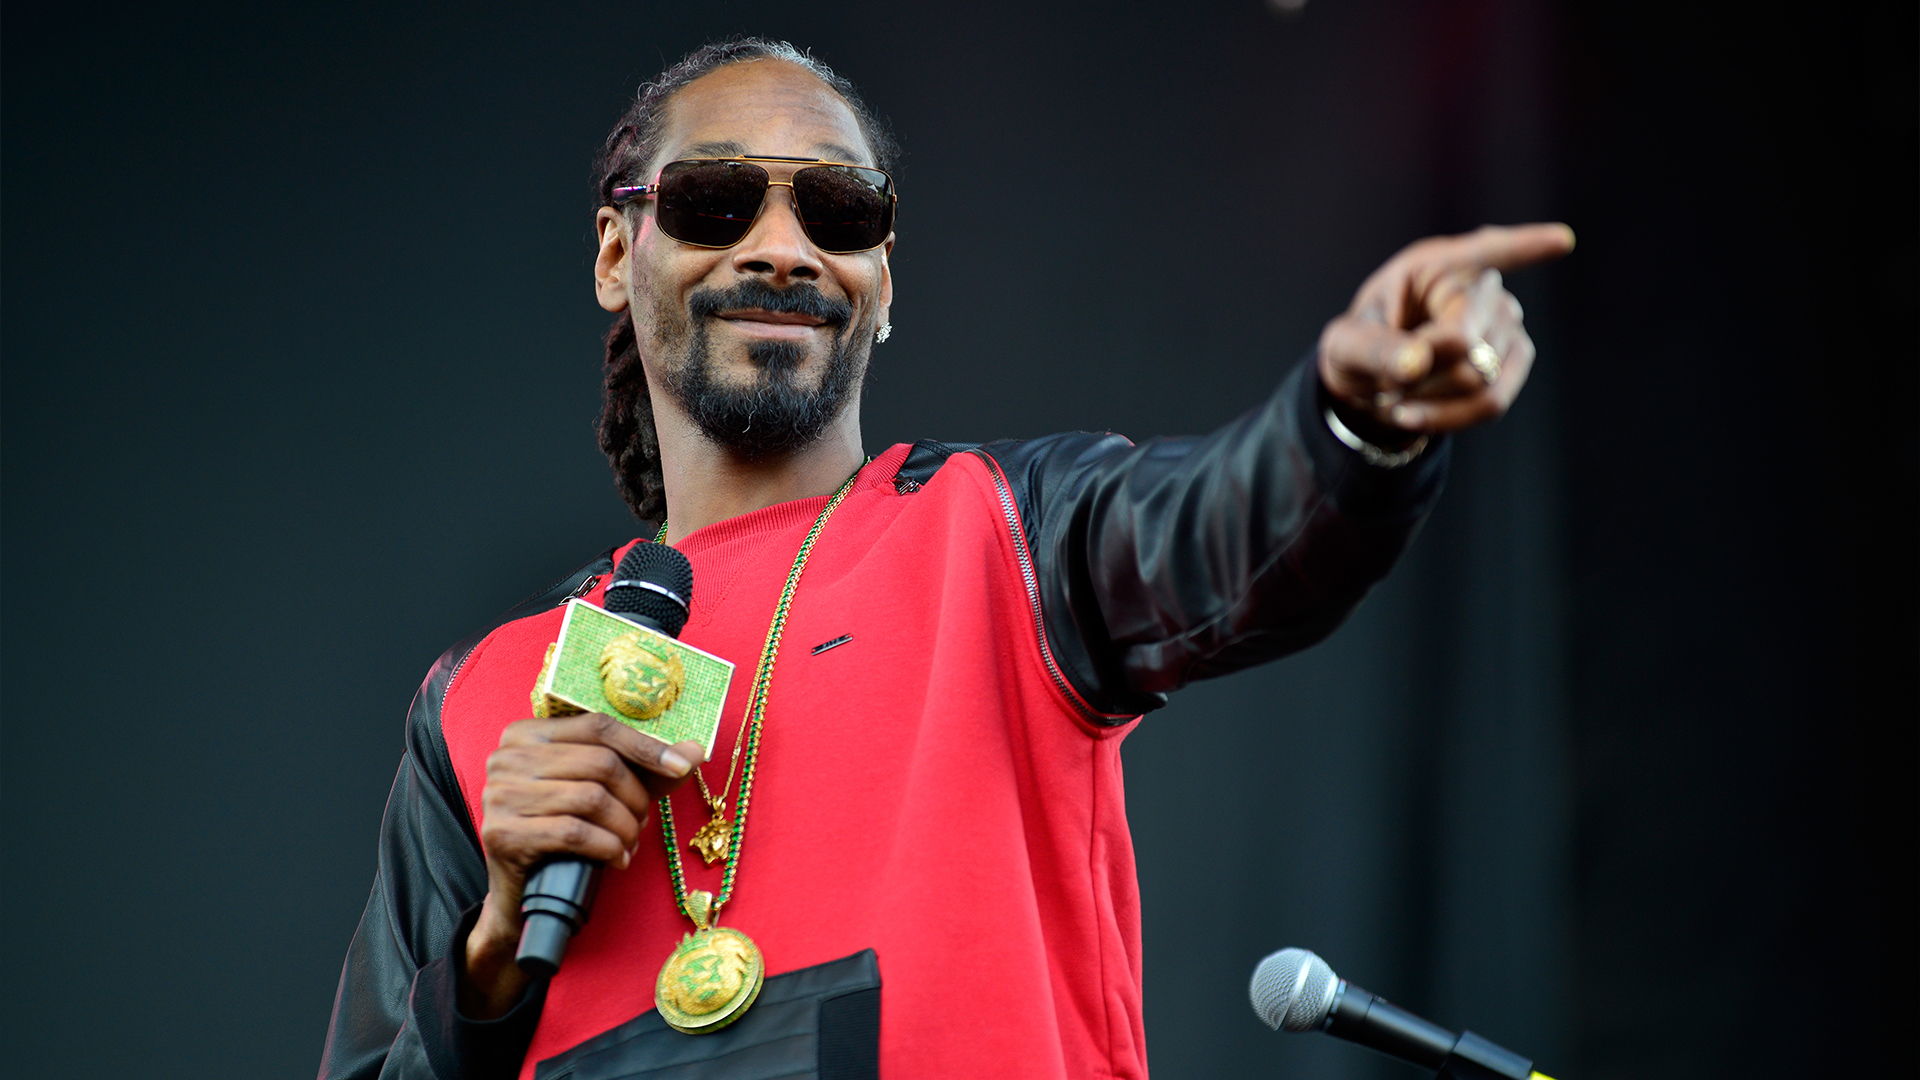 Snoop Dogg Confesses To Being The Face Behind One Of The Most Popular Twitter Accounts In The NFT World